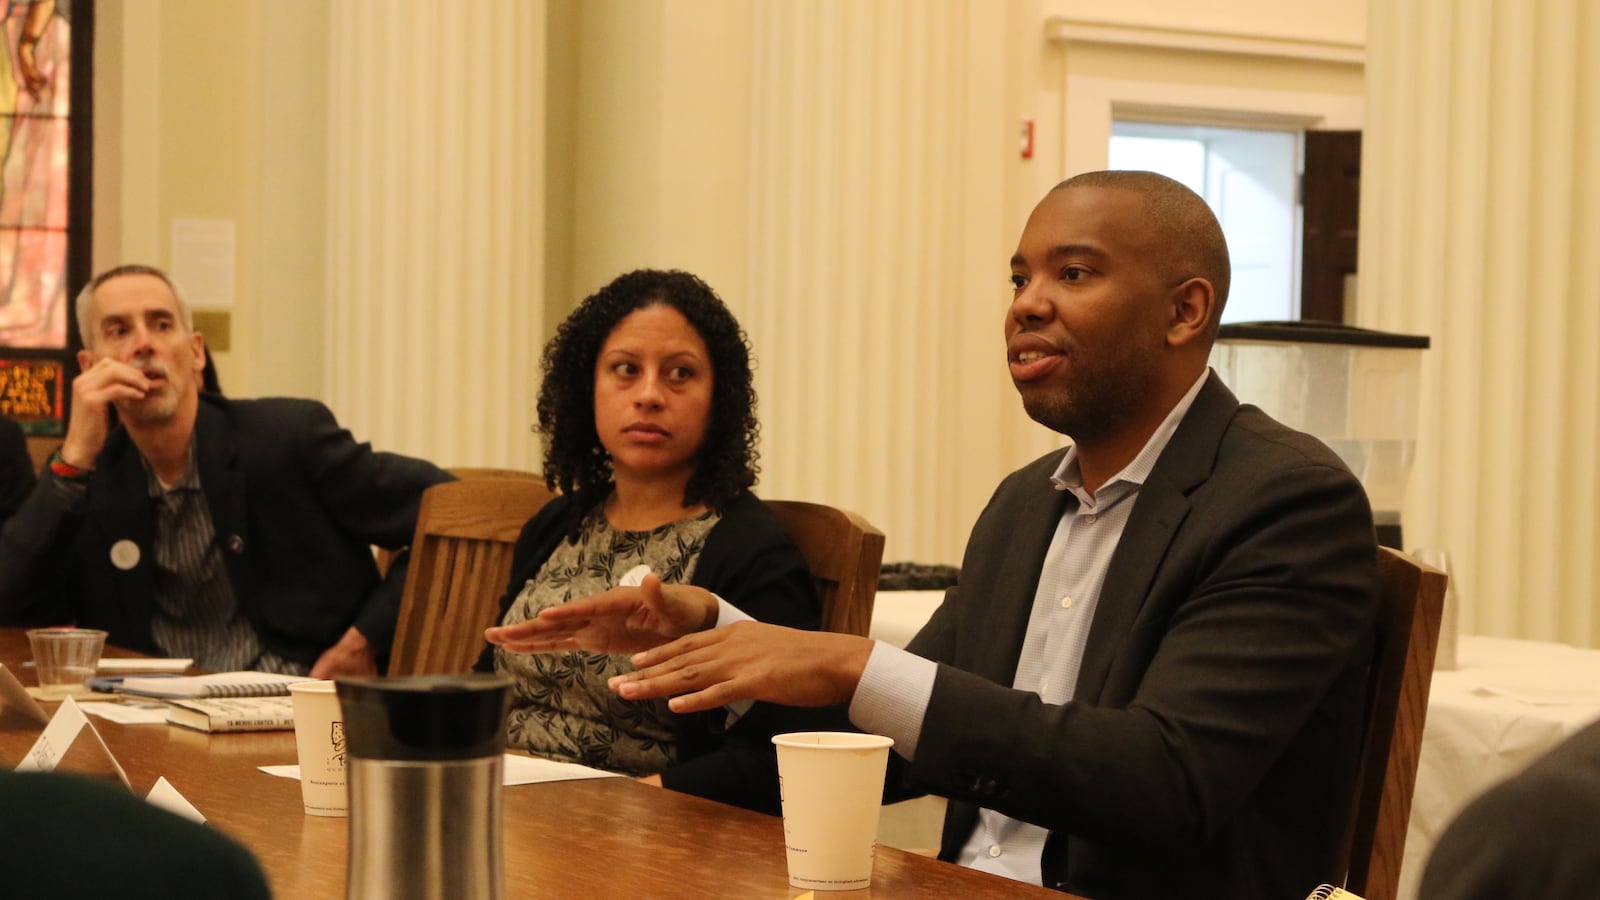 Ta-Nehisi Coates offered a "master class" for New York City school leaders on Monday.